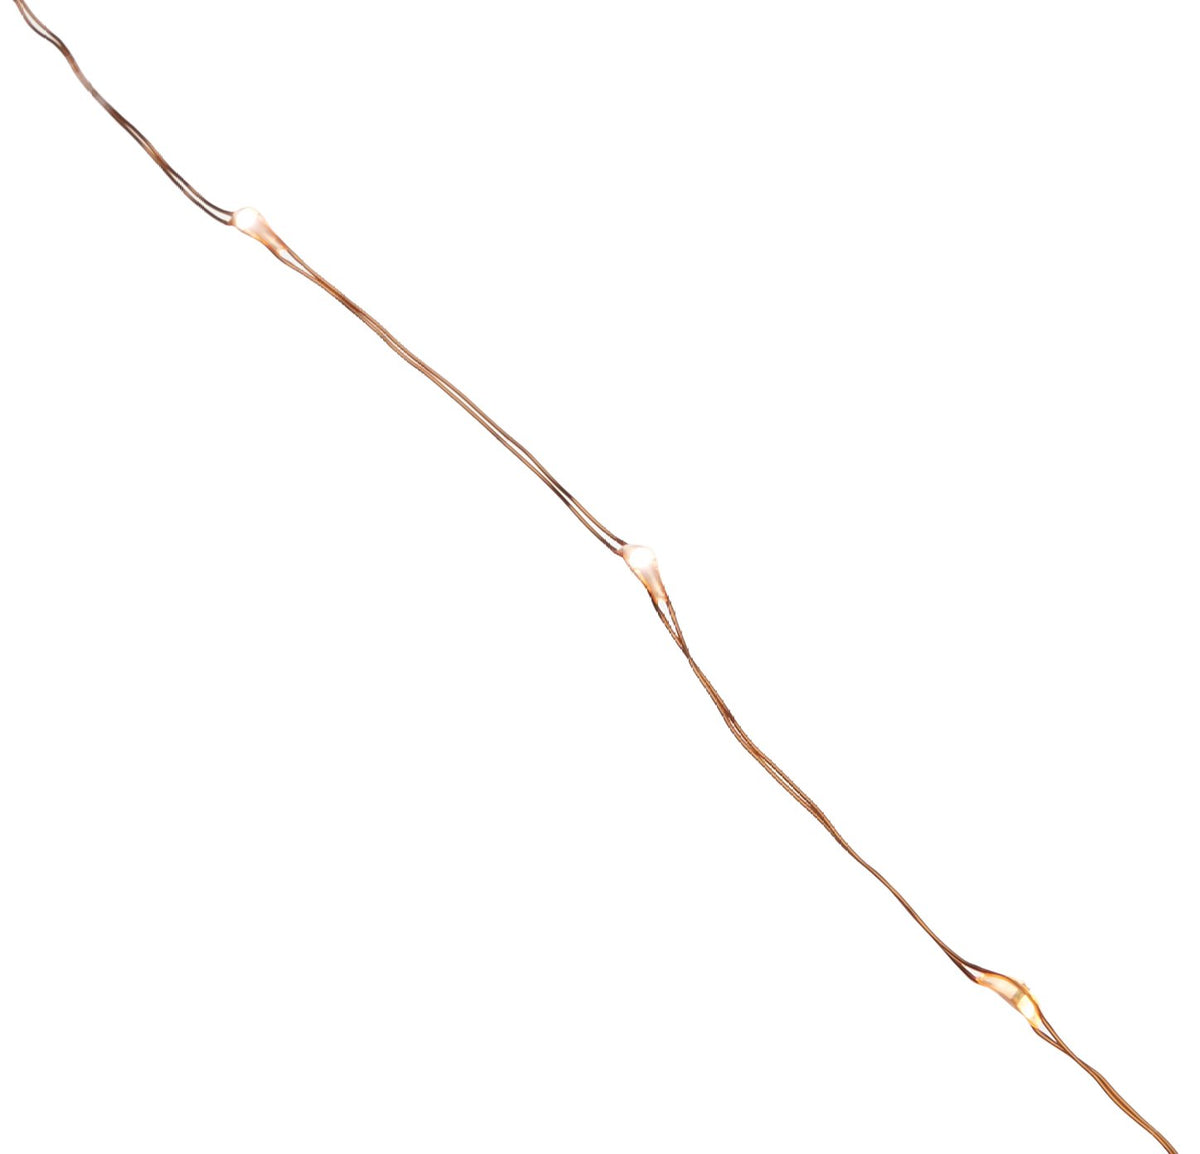 Everlasting Glow 92970 B/O Warm White Micro 30-LED String Light 5', Copper Wire